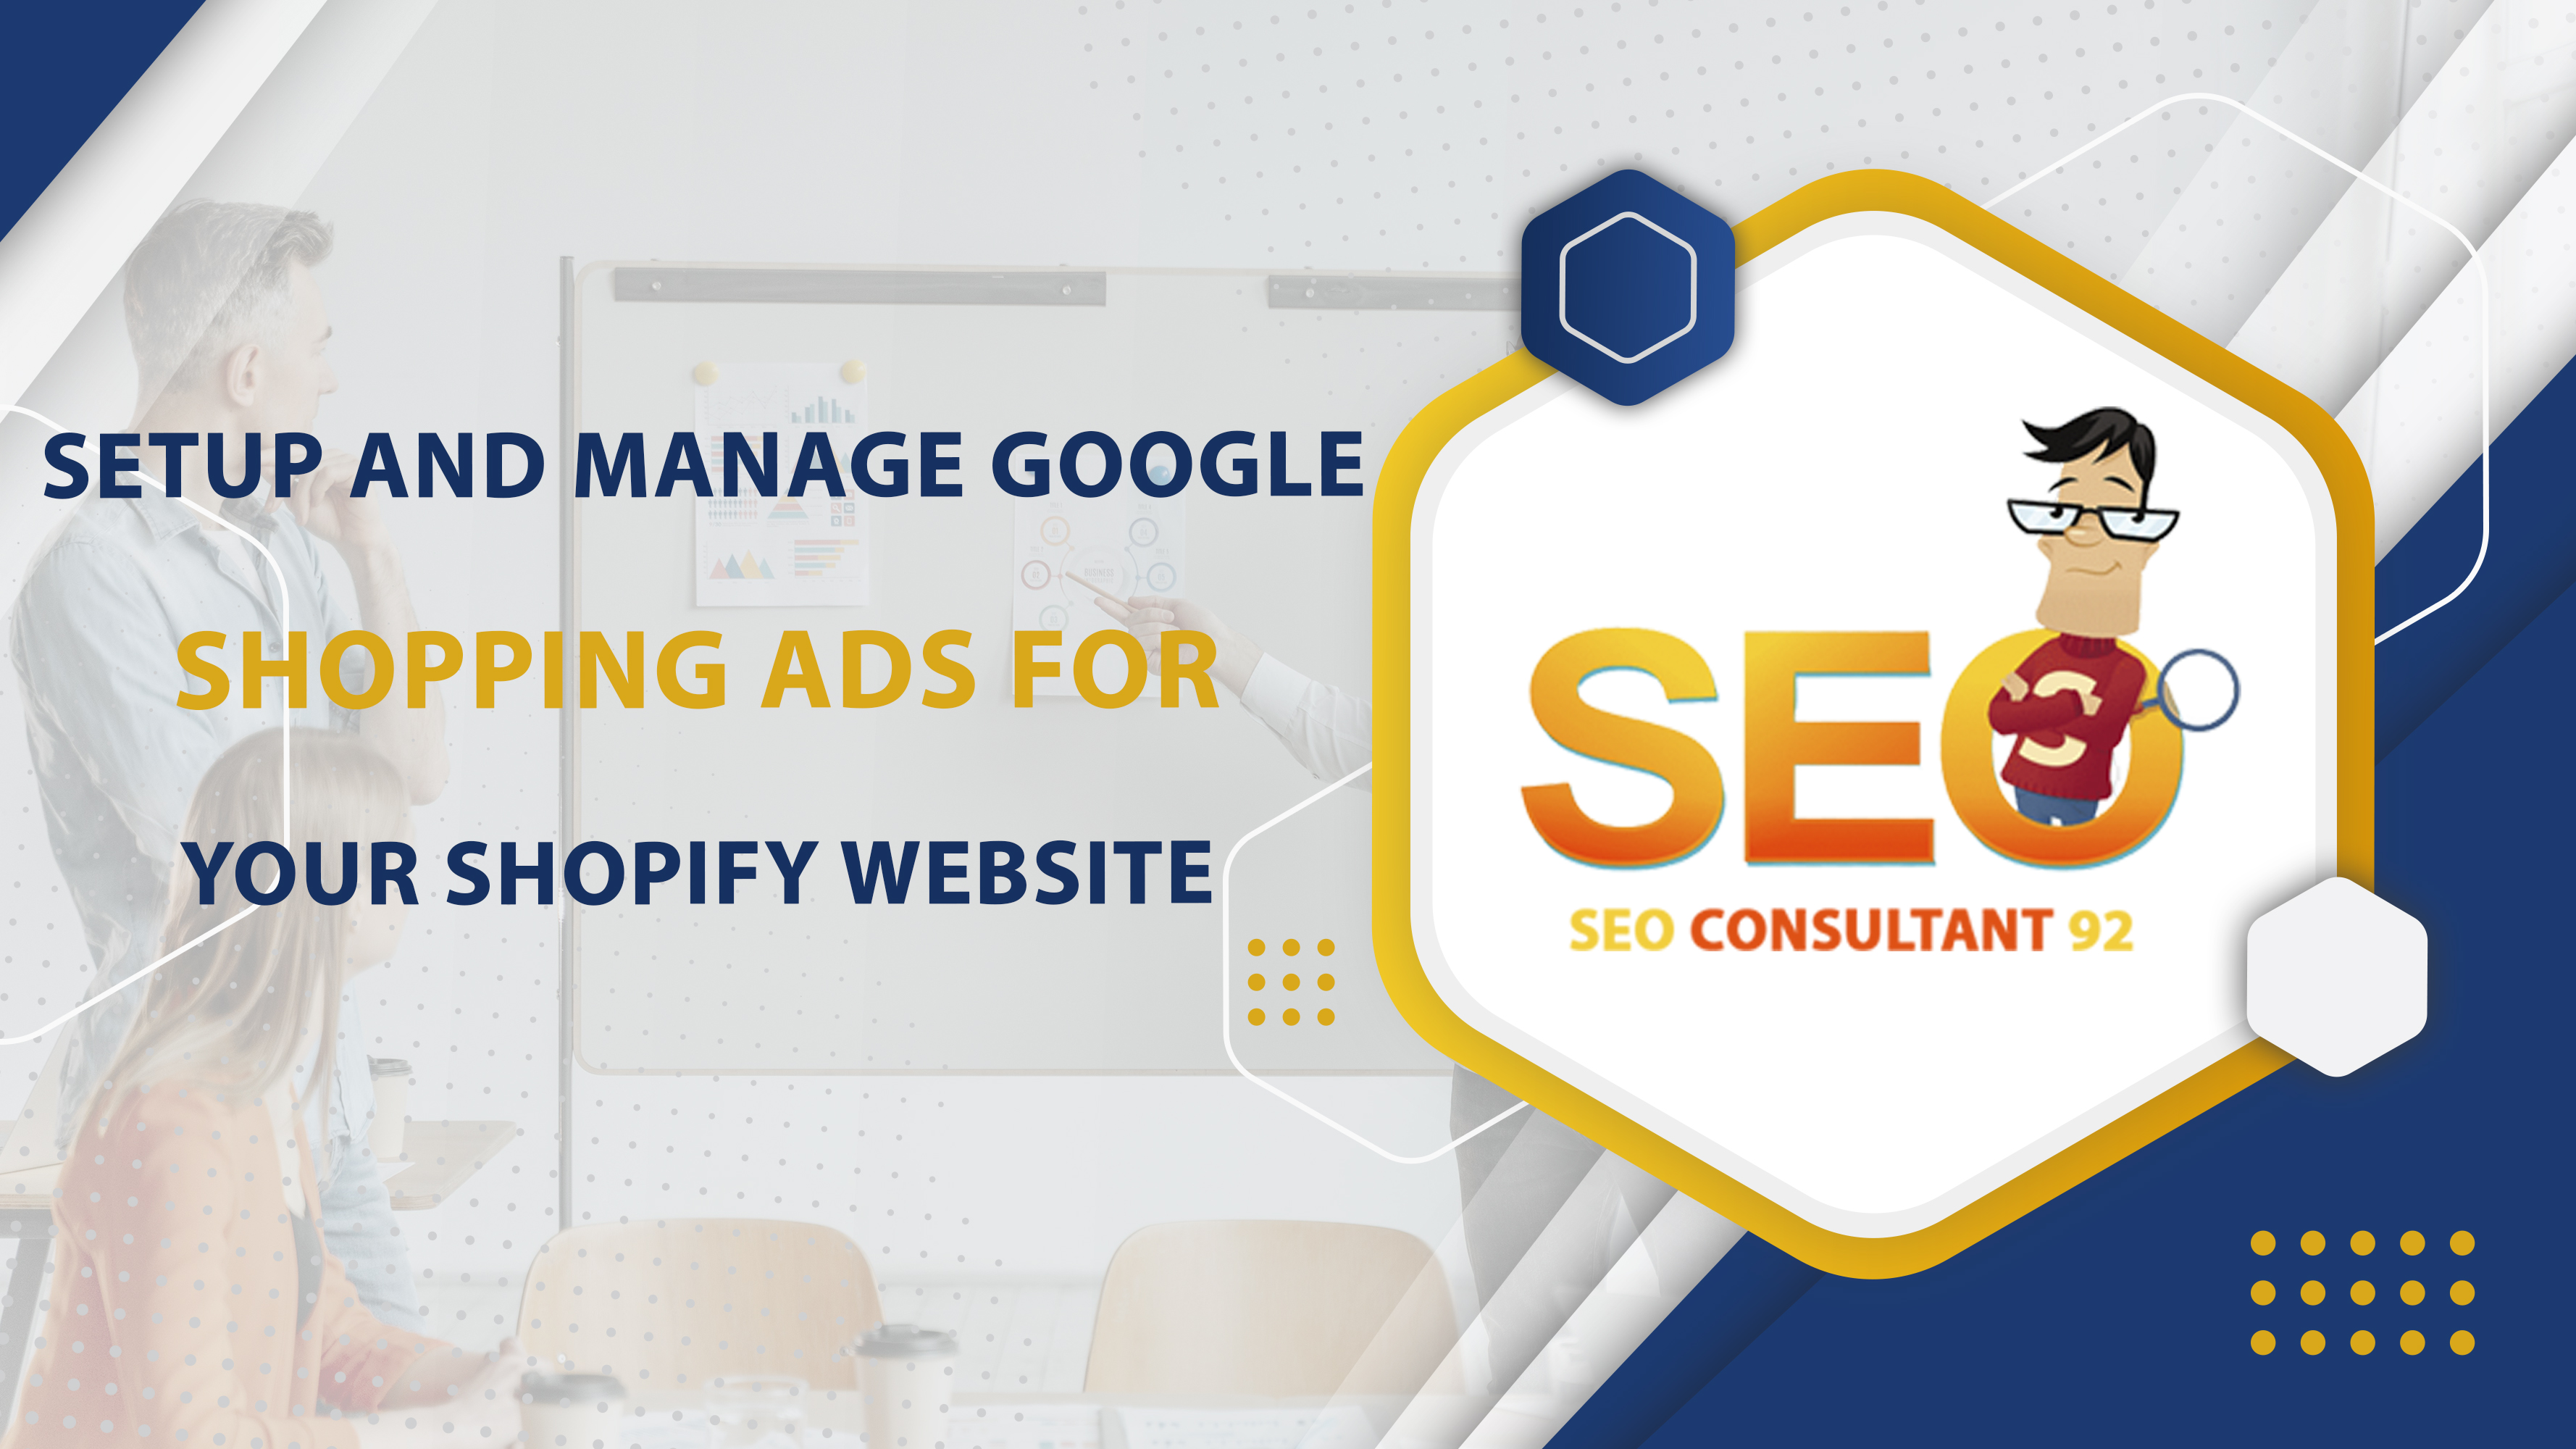 Setup and manage google shopping ads for your Shopify